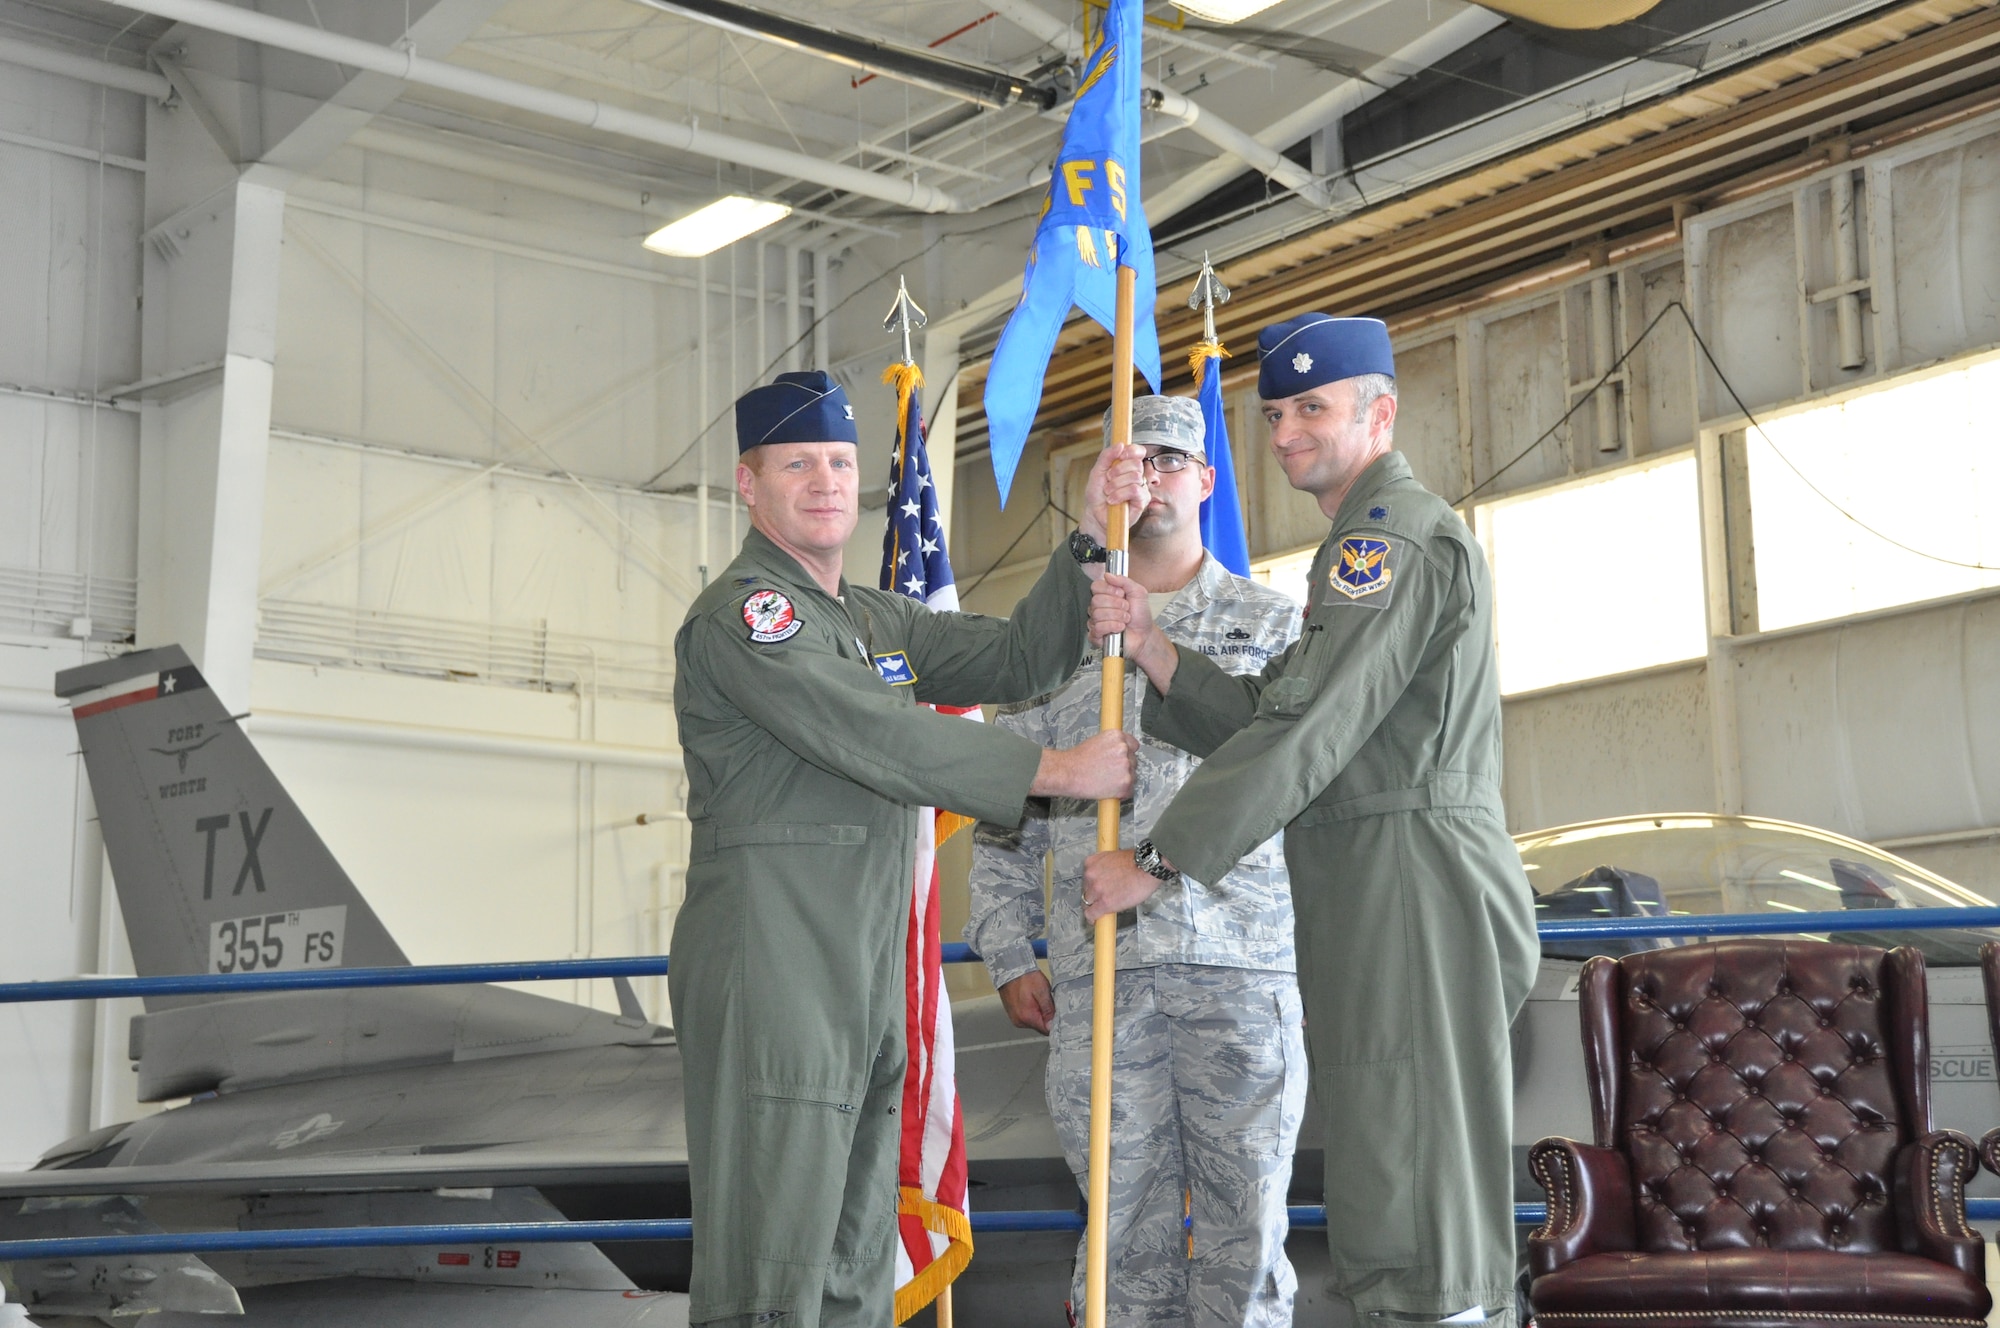 NAVAL AIR STATION FORT WORTH JOINT RESERVE BASE, Texas – Col. James McCune (left), 495th Fighter Group commander, presents the 355th Fighter Squadron guidon Oct. 5 to Lt. Col. Jeffrey Cunningham (right), 355 FS commander, during the re-designation ceremony here. The 355 FS, who fly the F-16 Fighting Falcon alongside the 301st Fighter Wing, is the first active associate fighter squadron within the Air Force Reserve. (U.S. Air Force photo by Ms. Julie Briden-Garcia)